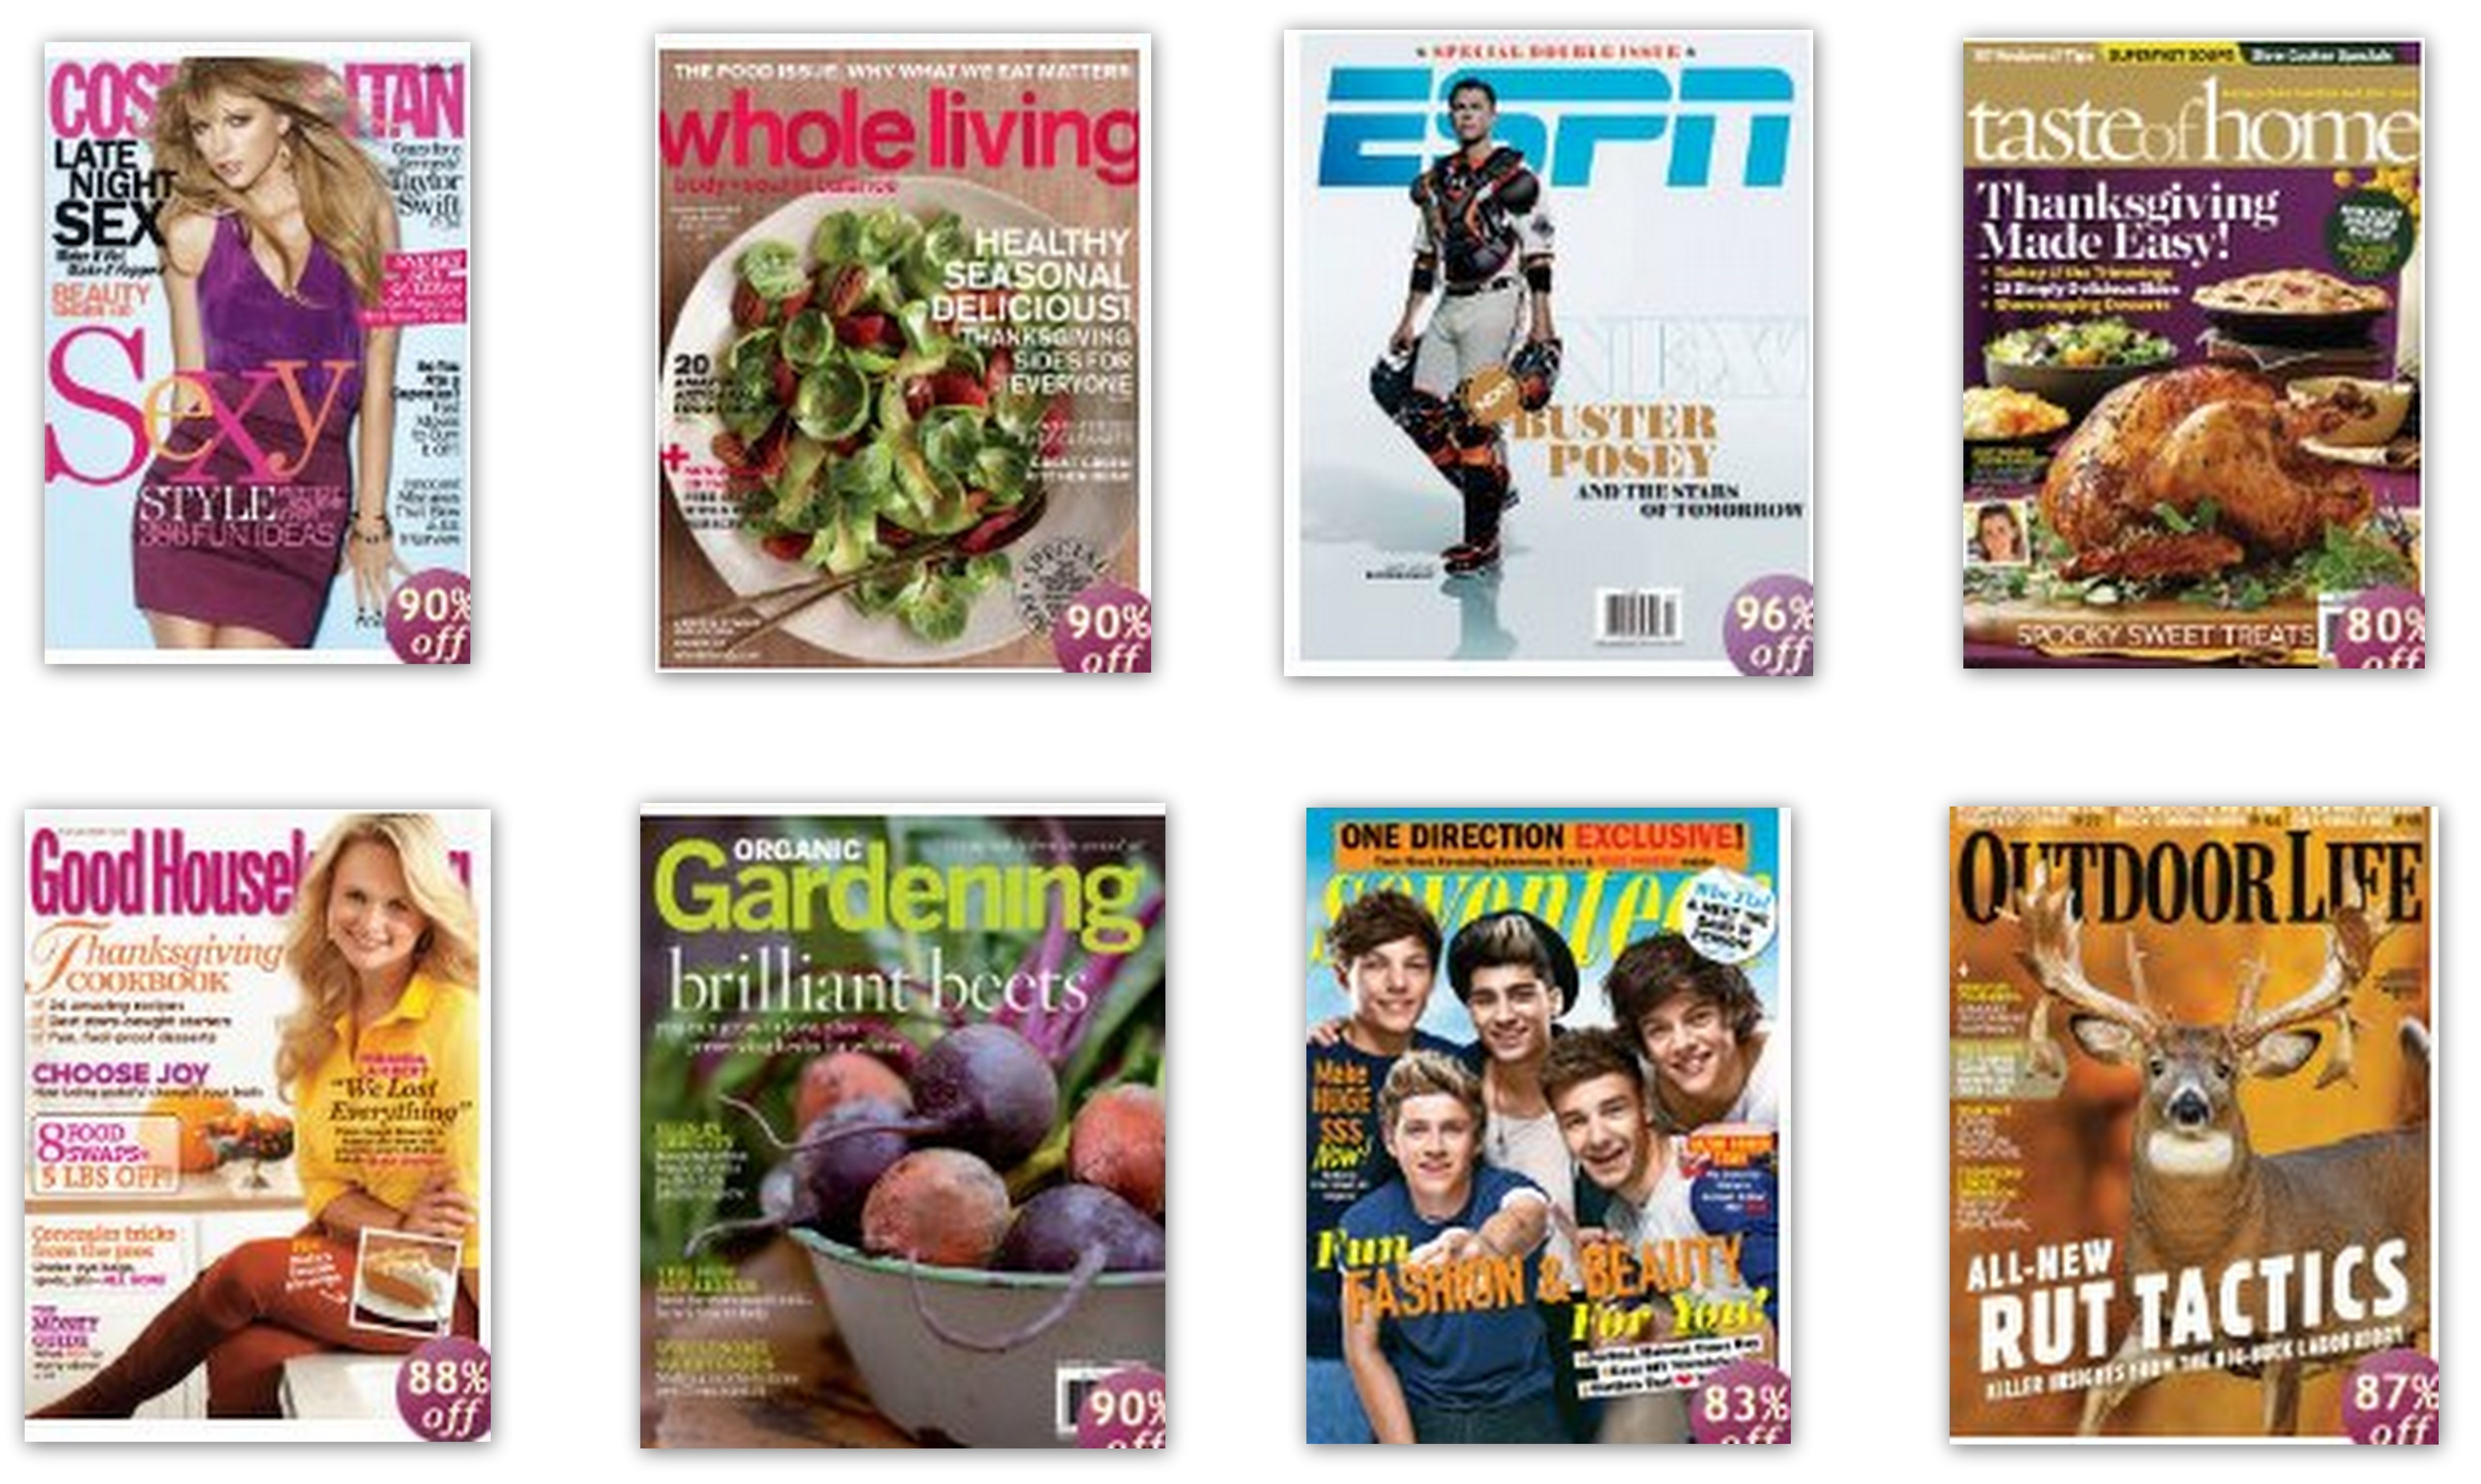 $5 Magazine Sale: Better Homes and Gardens, Cosmo, Parenting, ESPN, Taste of Home, Seventeen + Many More!